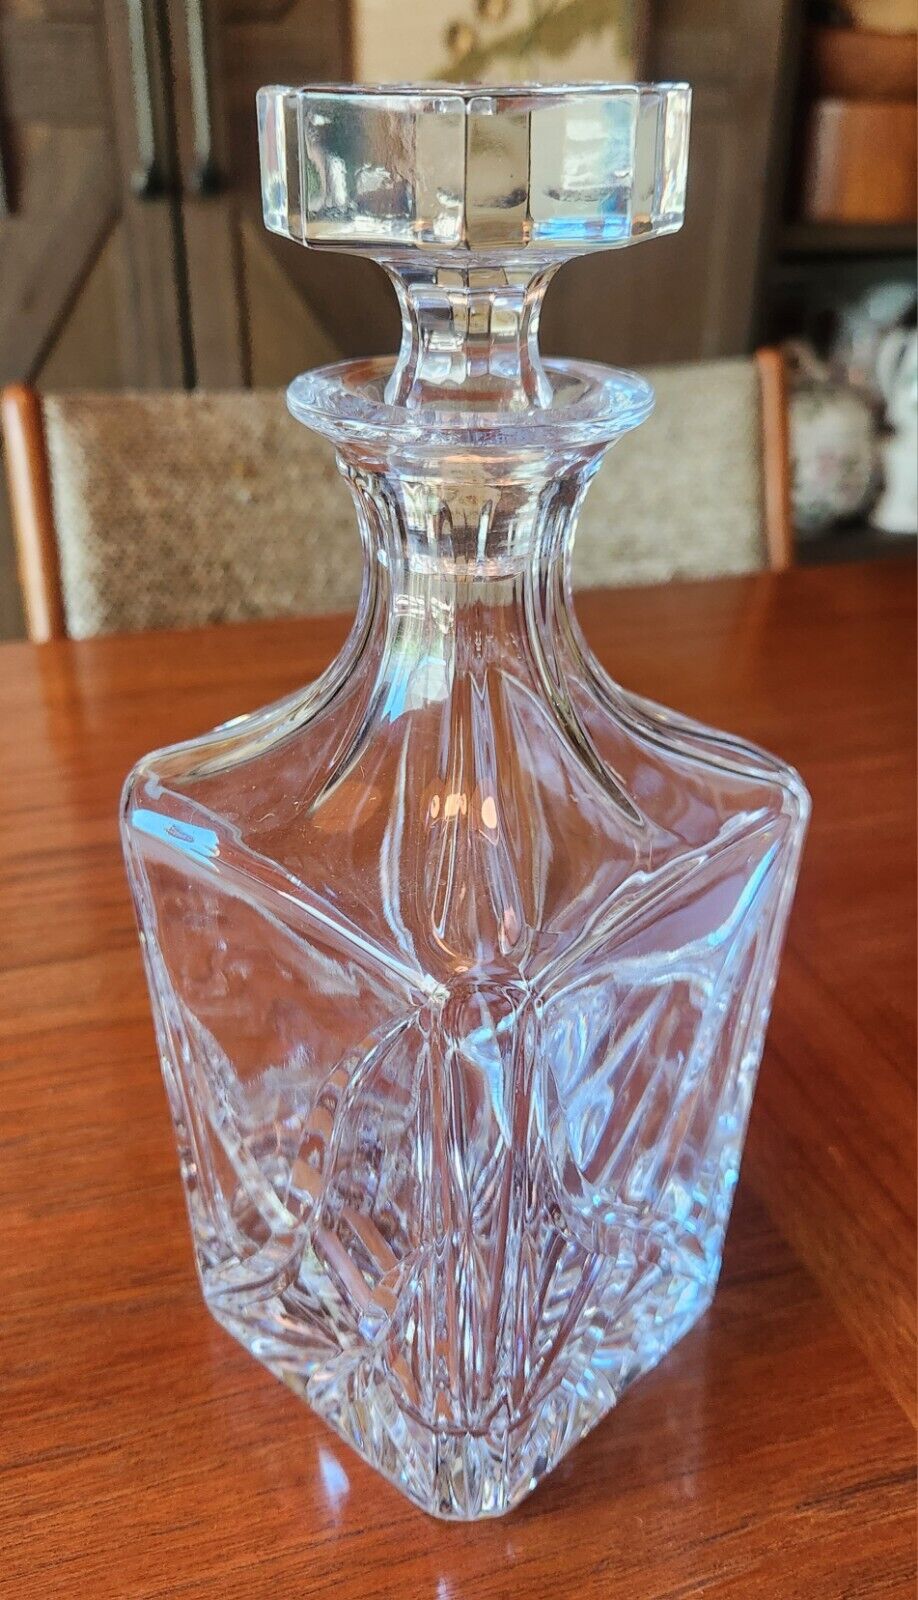 GORHAM Lead Crystal Cut Square Decanter MONTE CARLO Pattern 